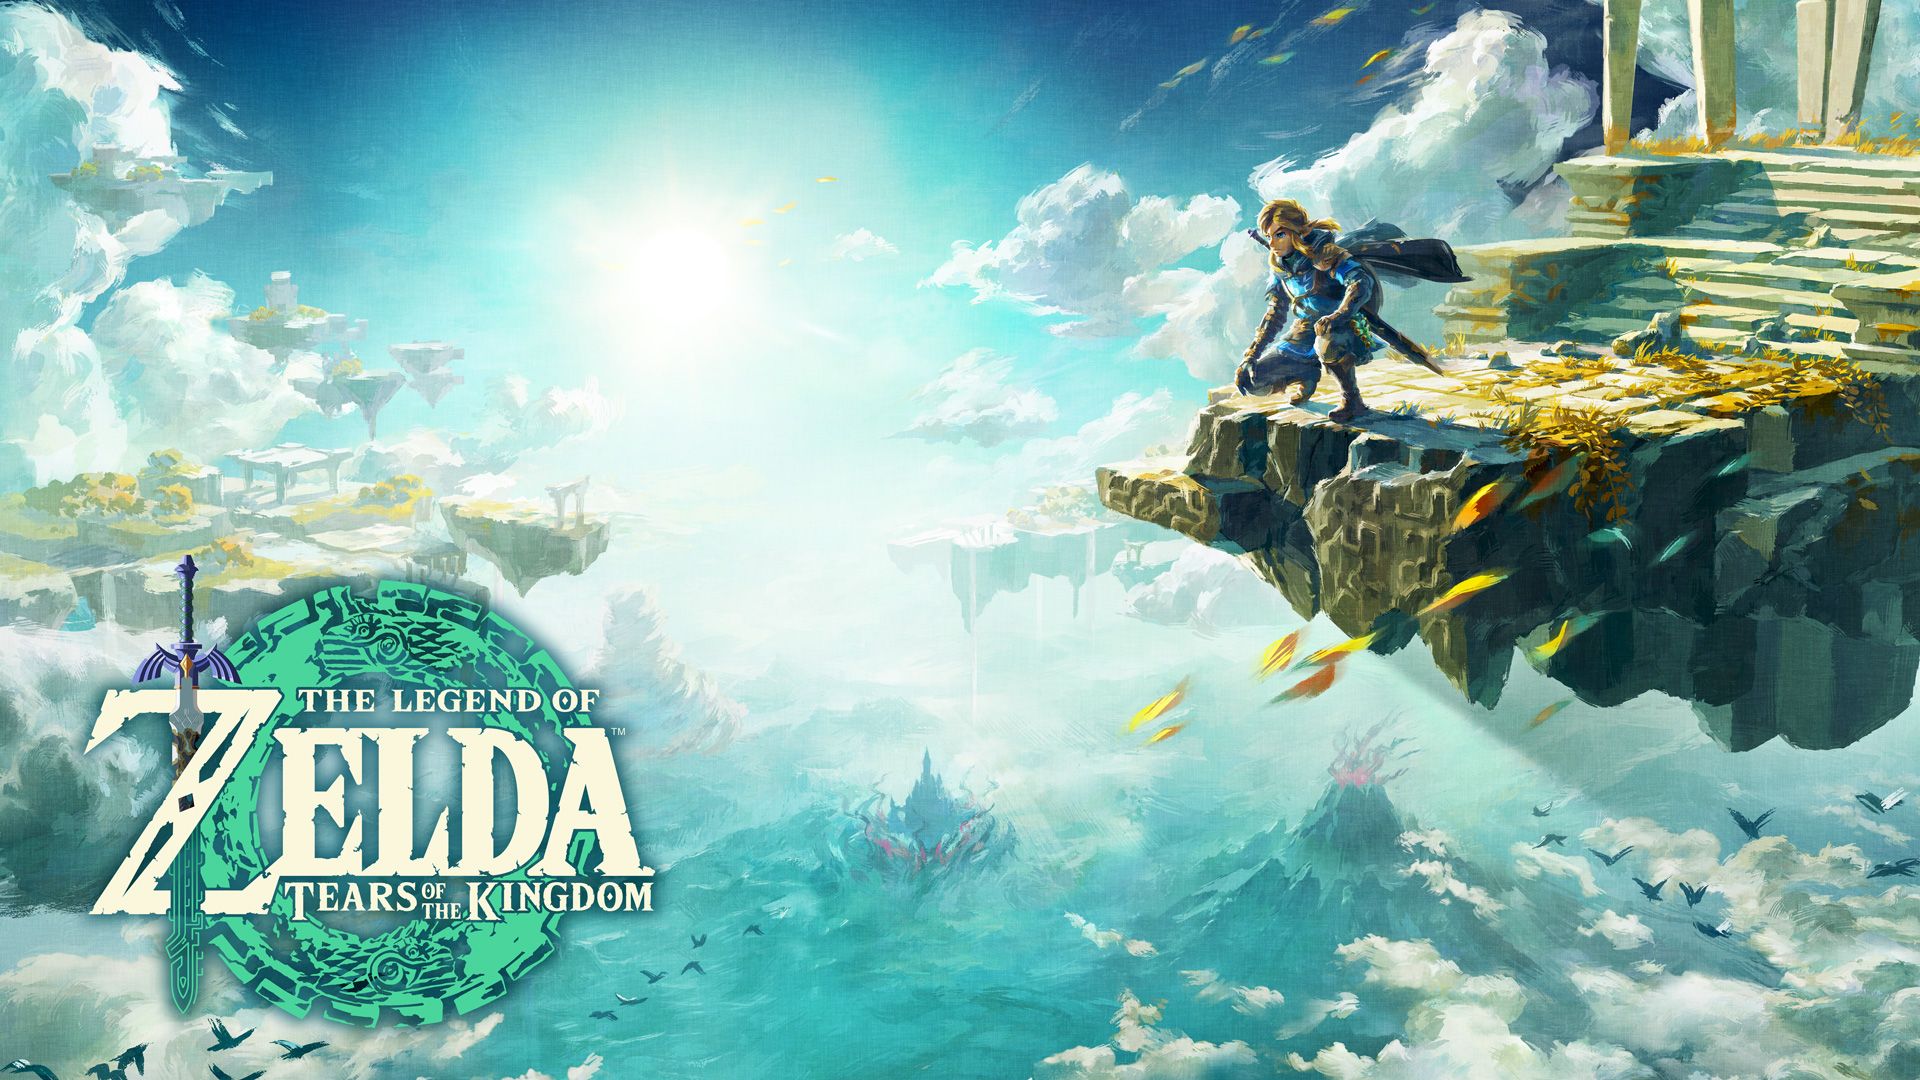 The Legend of Zelda: Breath of the Wild Review, the legend of